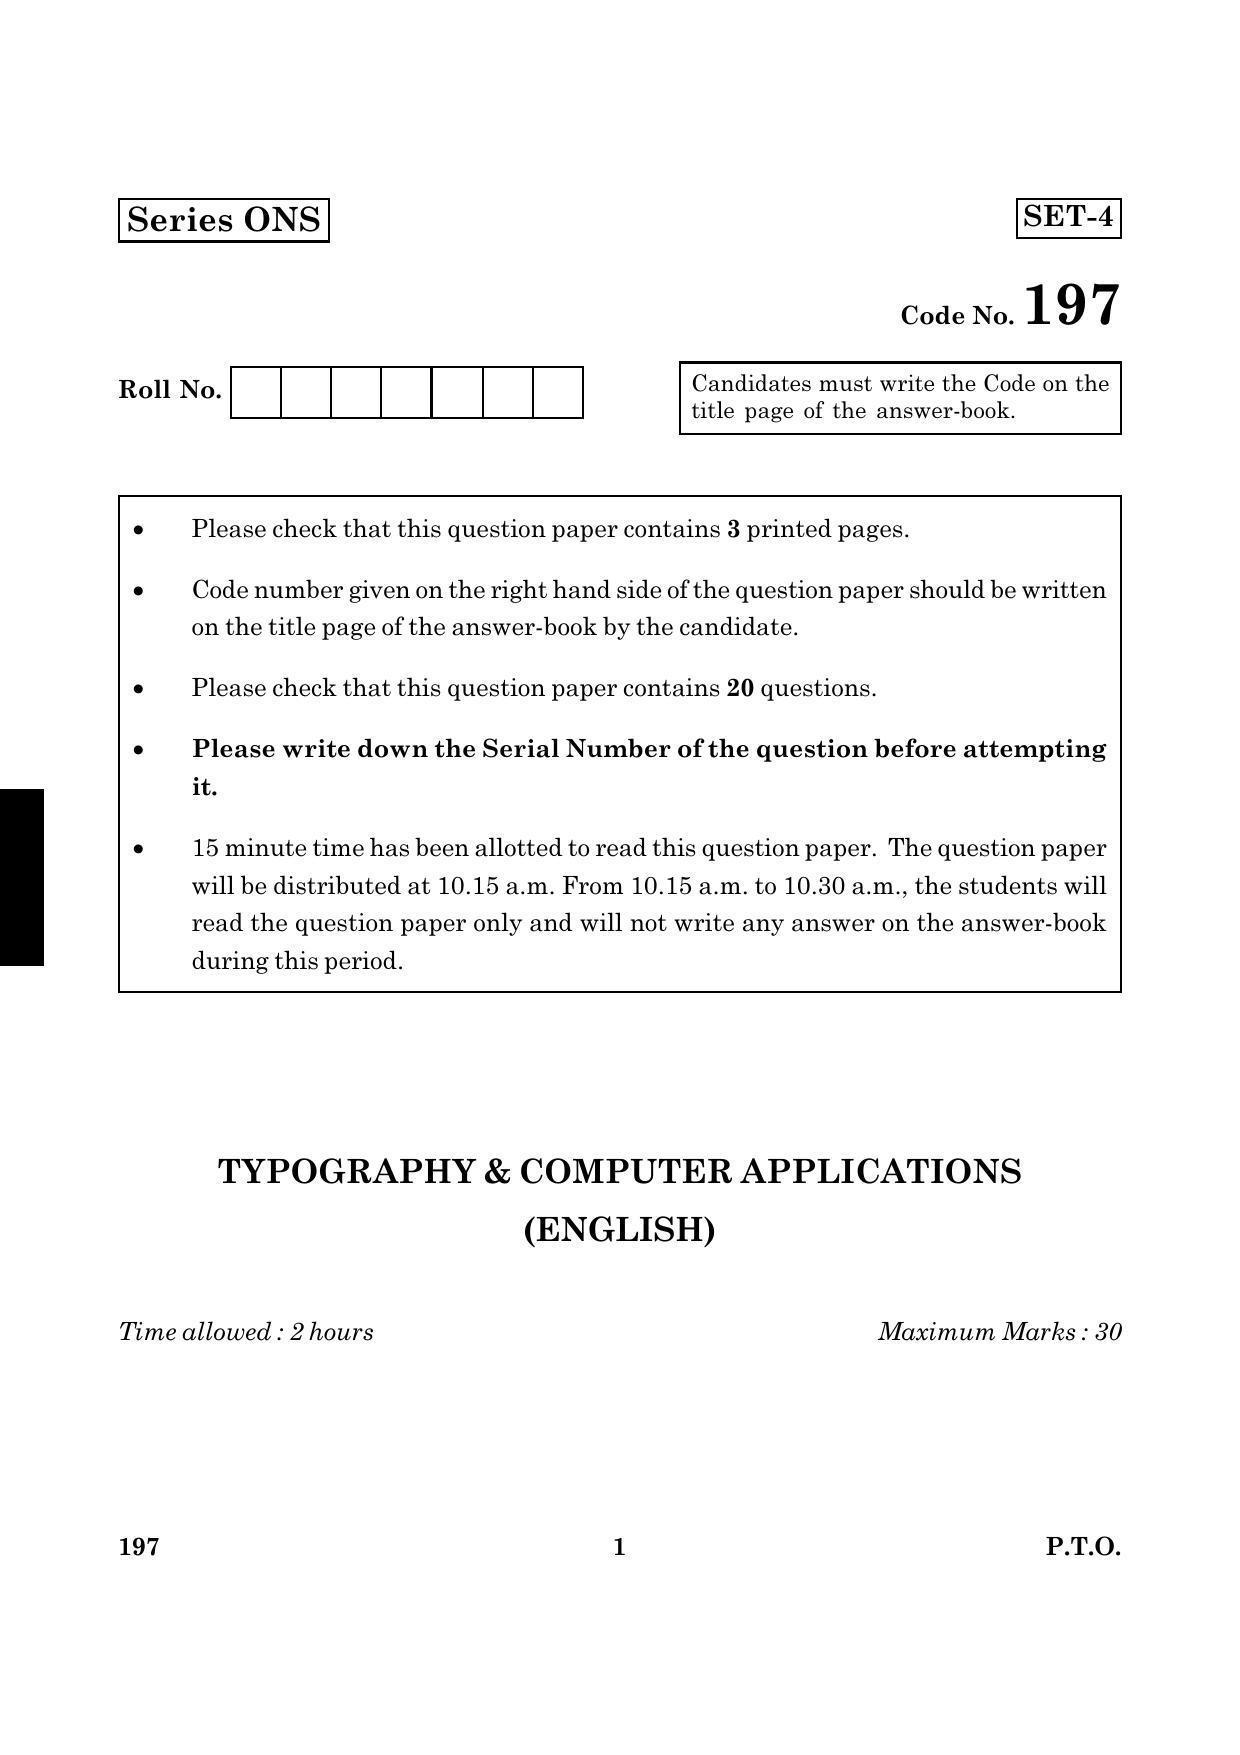 CBSE Class 12 197 TYPOGRAPHY & COMPUTER APPLICATION 2016 Question Paper - Page 1